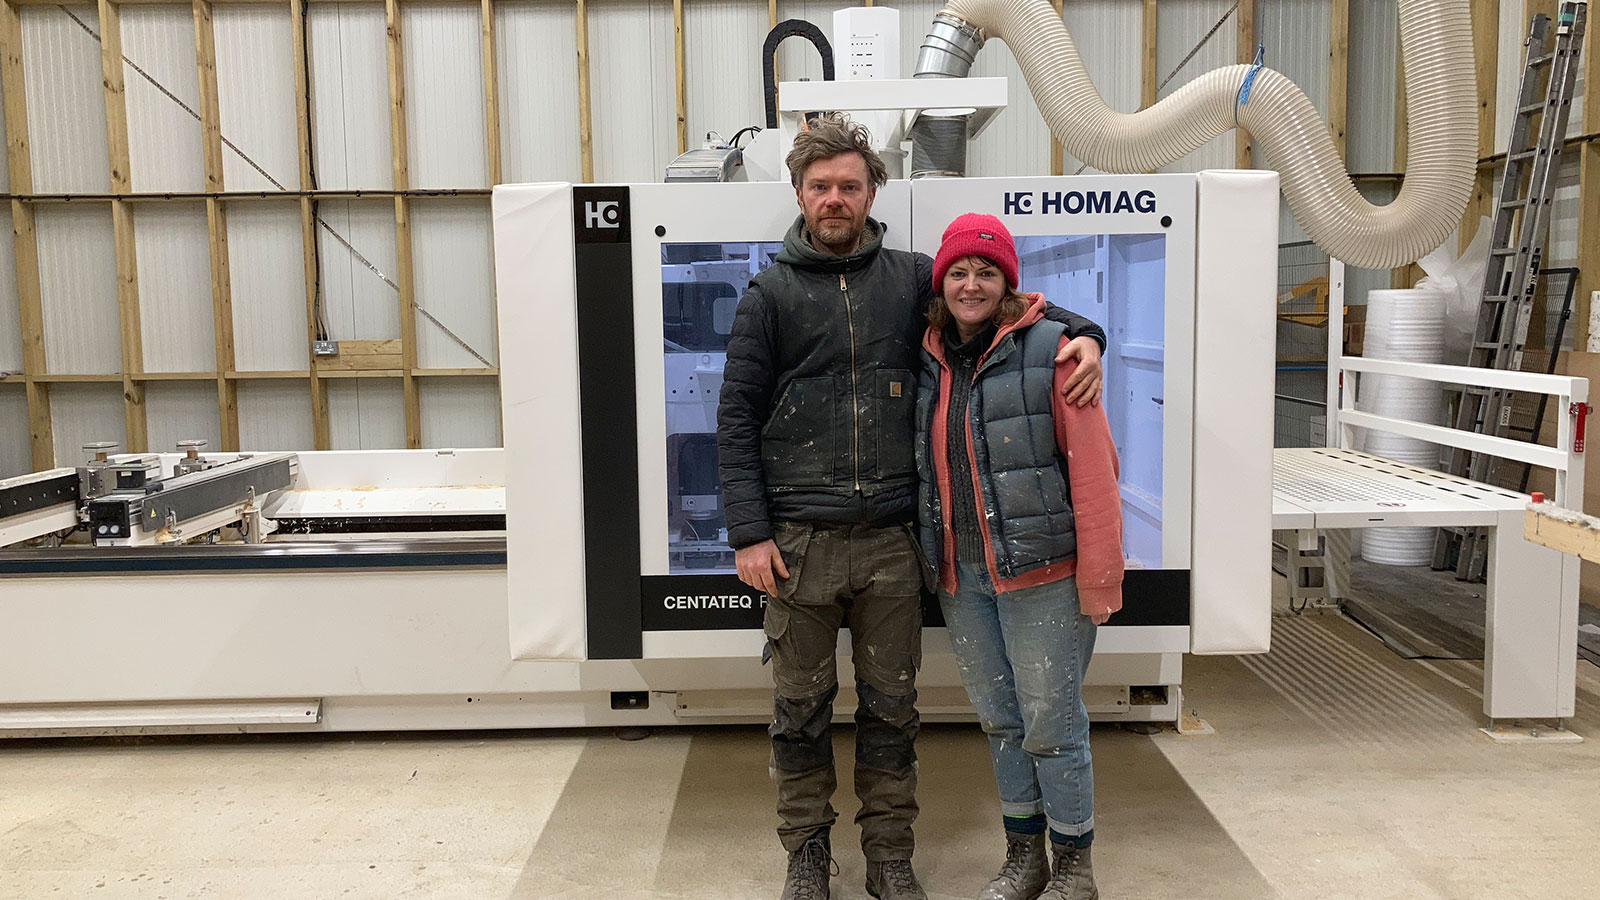 Ryan and Sophie Woodward with their CENTATEQ P-310 CNC from HOMAG UK